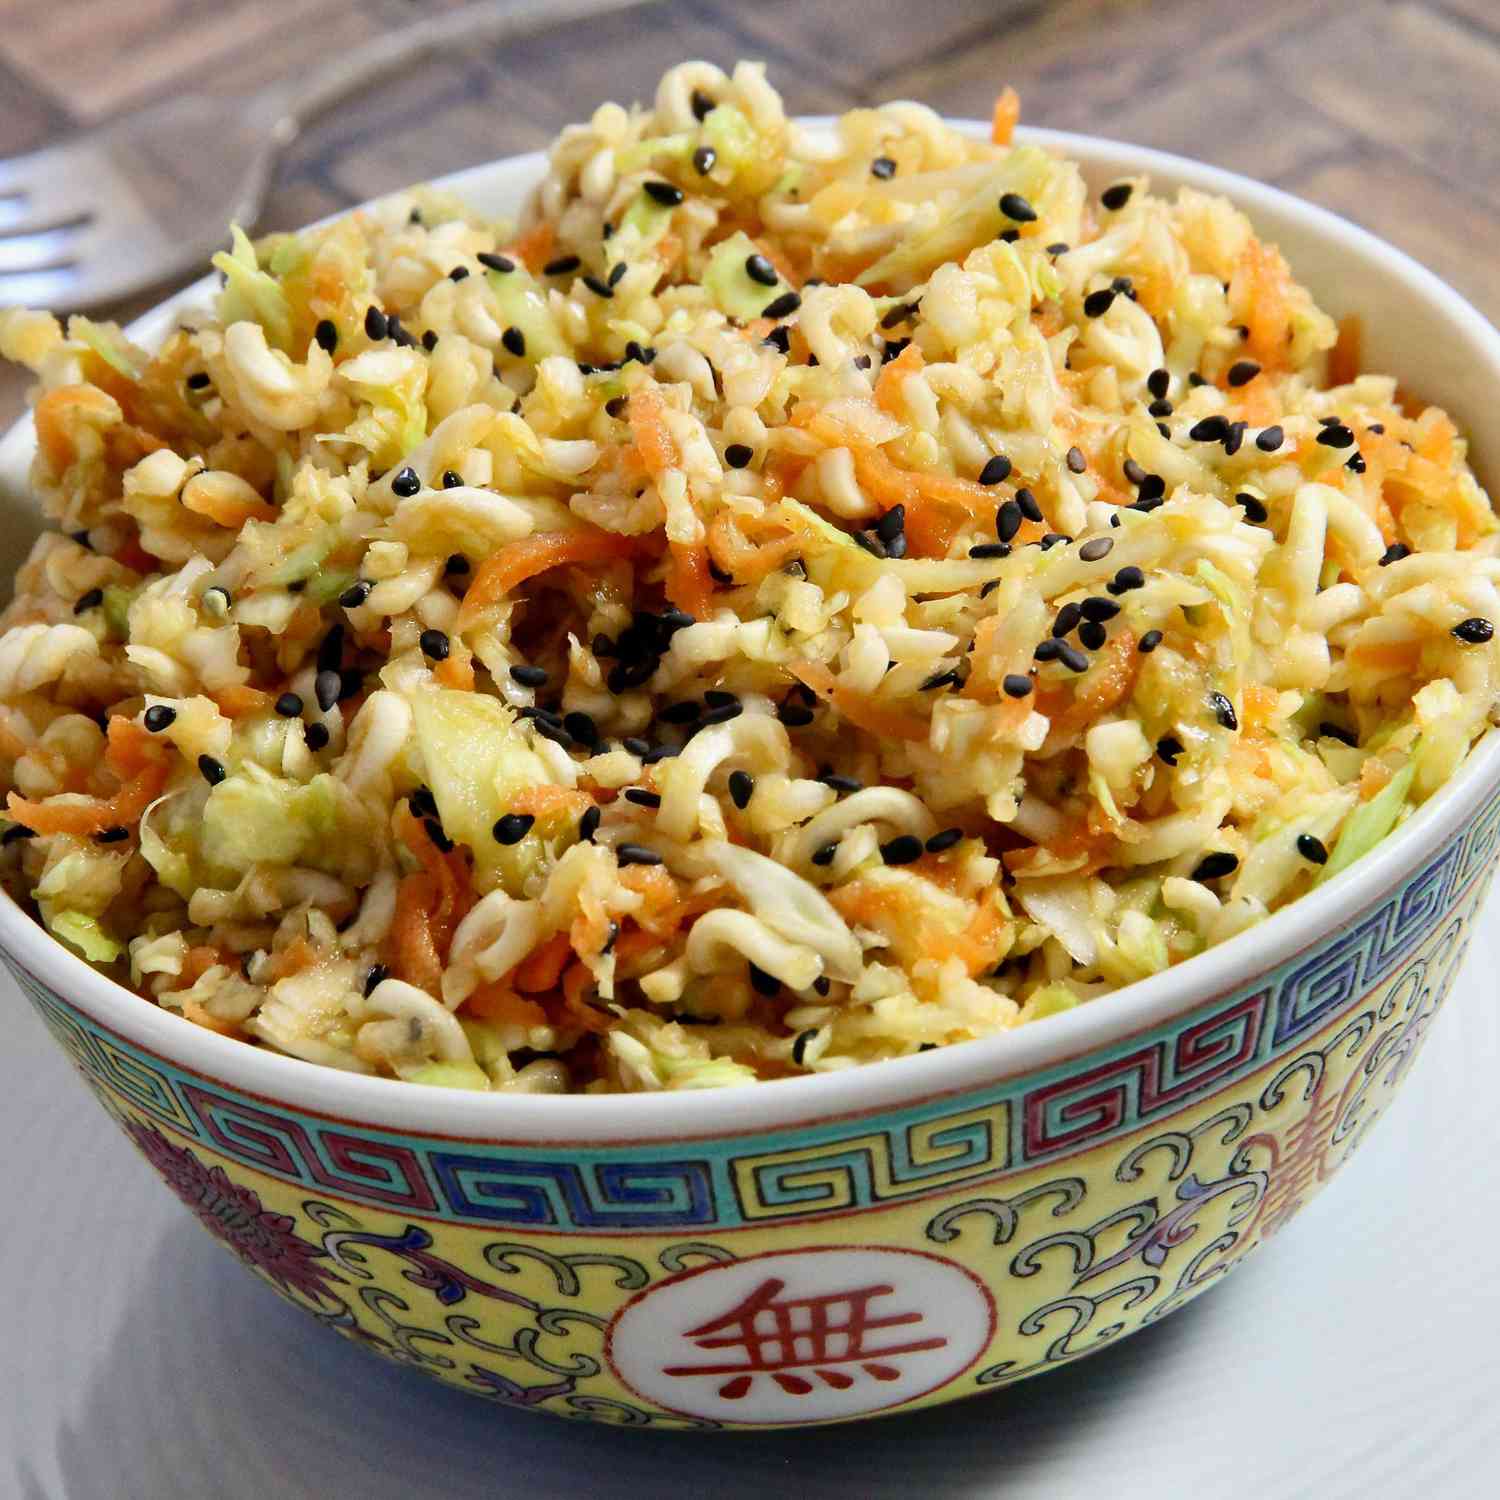 Chinese Cabbage Salad in a decorated bowl